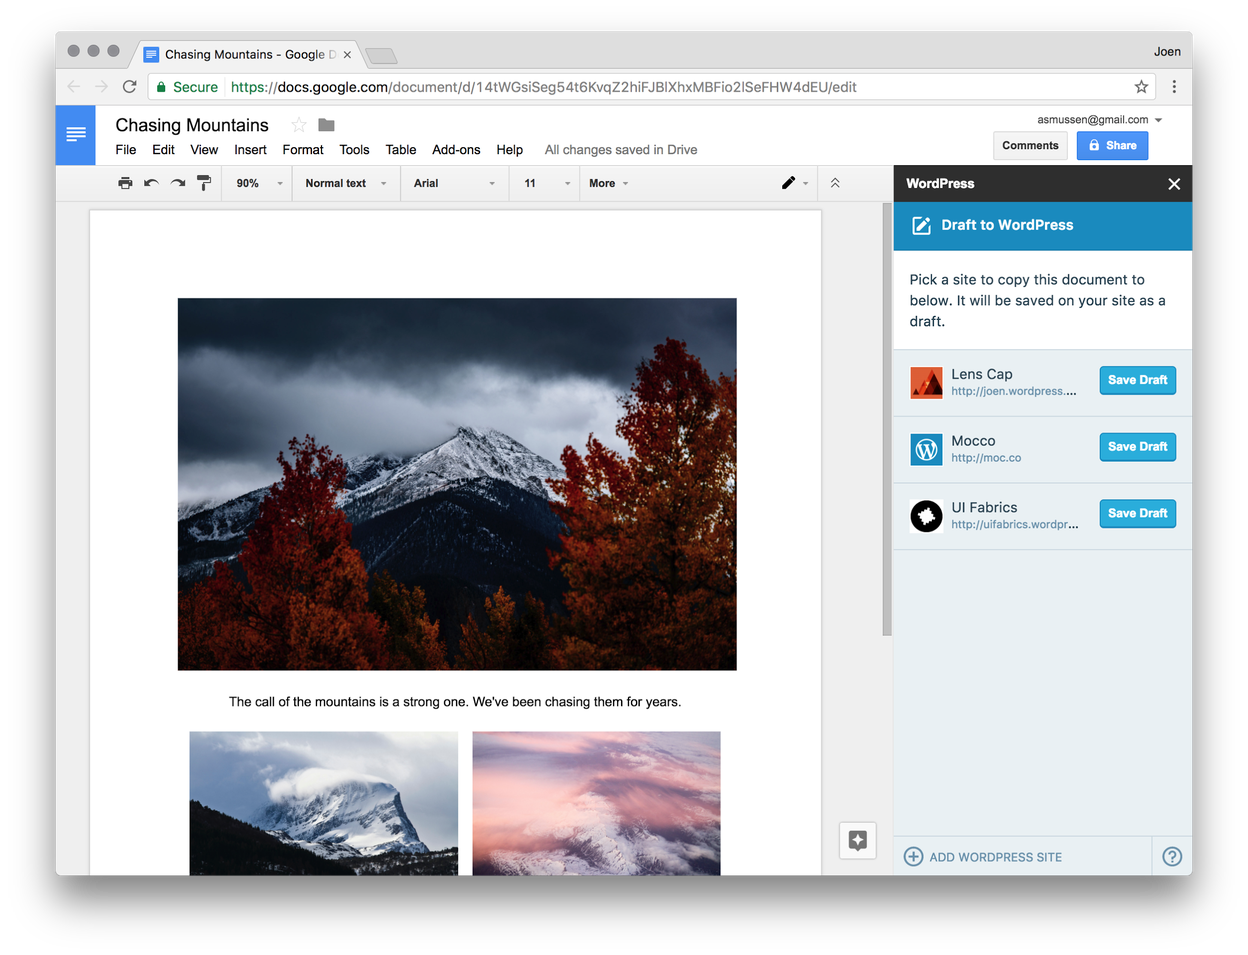 WordPress for Google Docs Lets Multiple Users Collaborate on Content in Real-Time